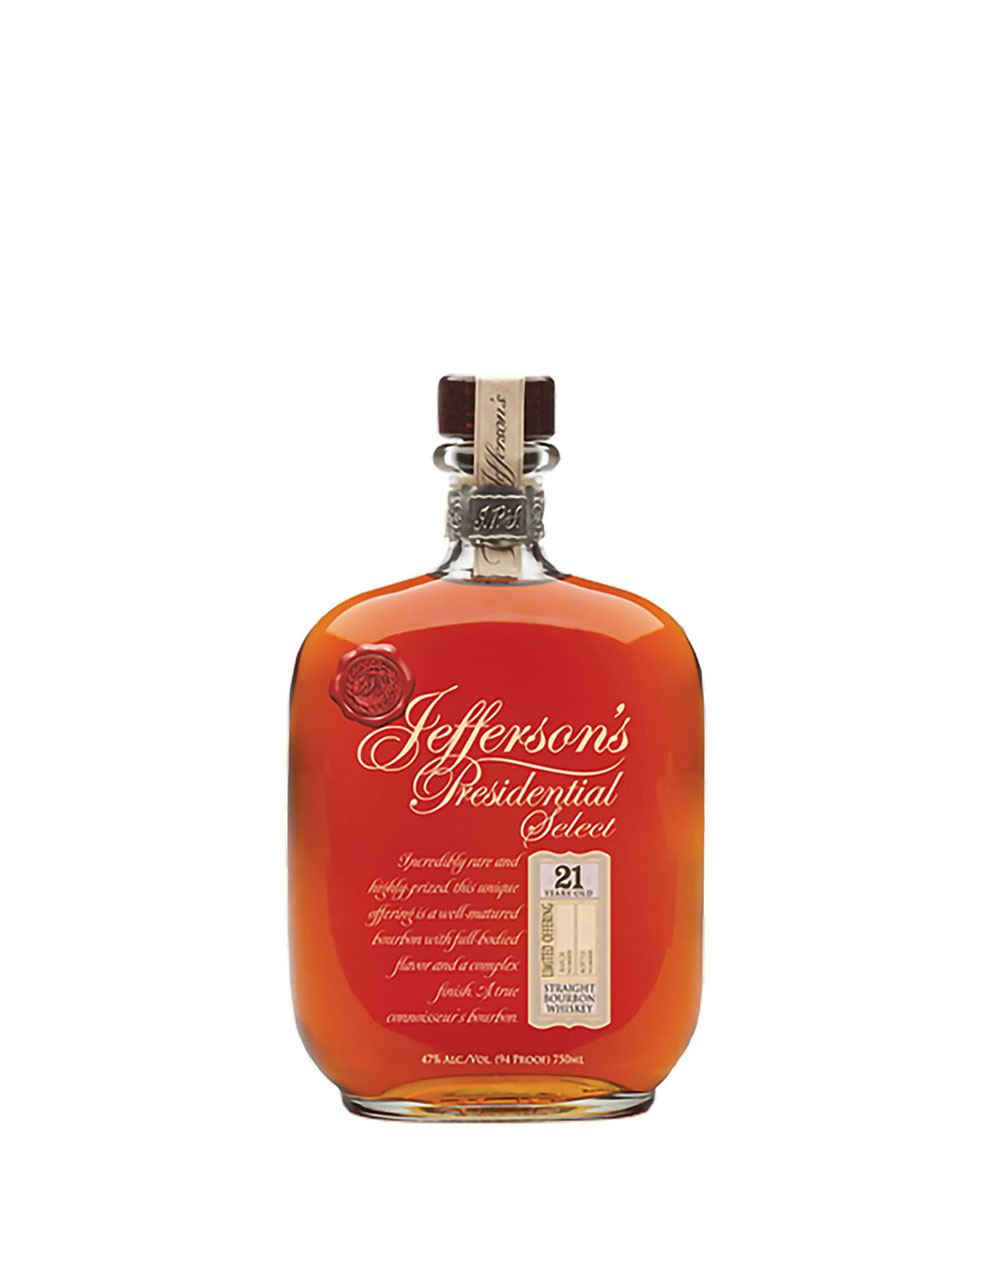 Jefferson's Presidential Select 21 Year Old Bourbon